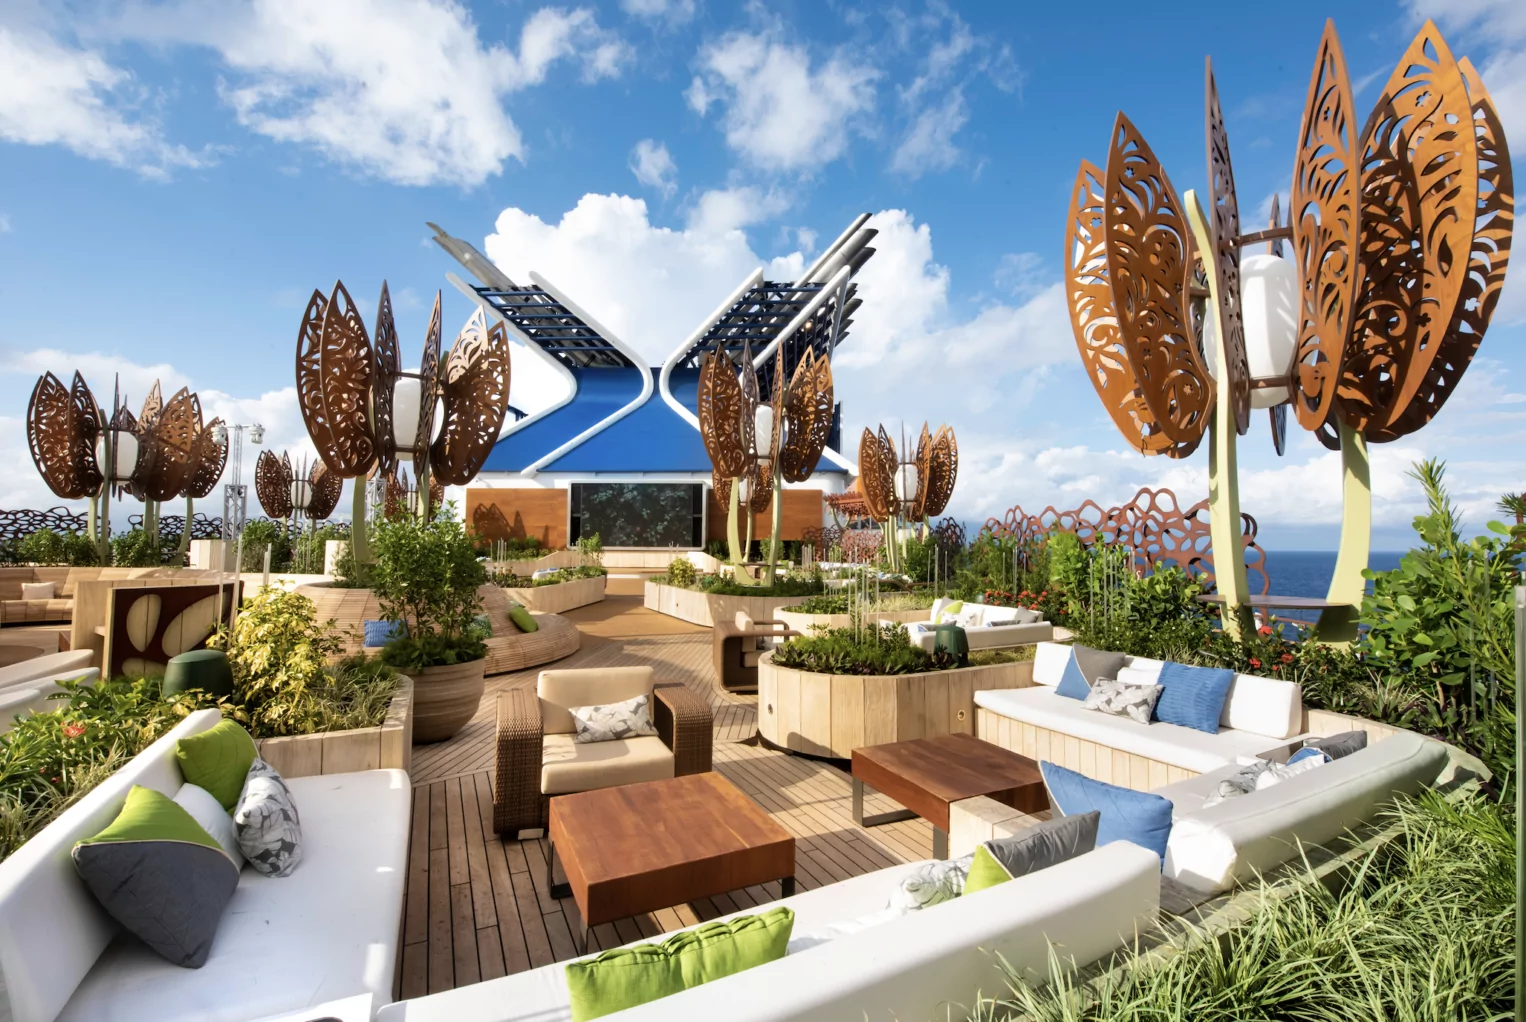 Celebrity Edge is one of the high-end ships ideal for solo cruises. 